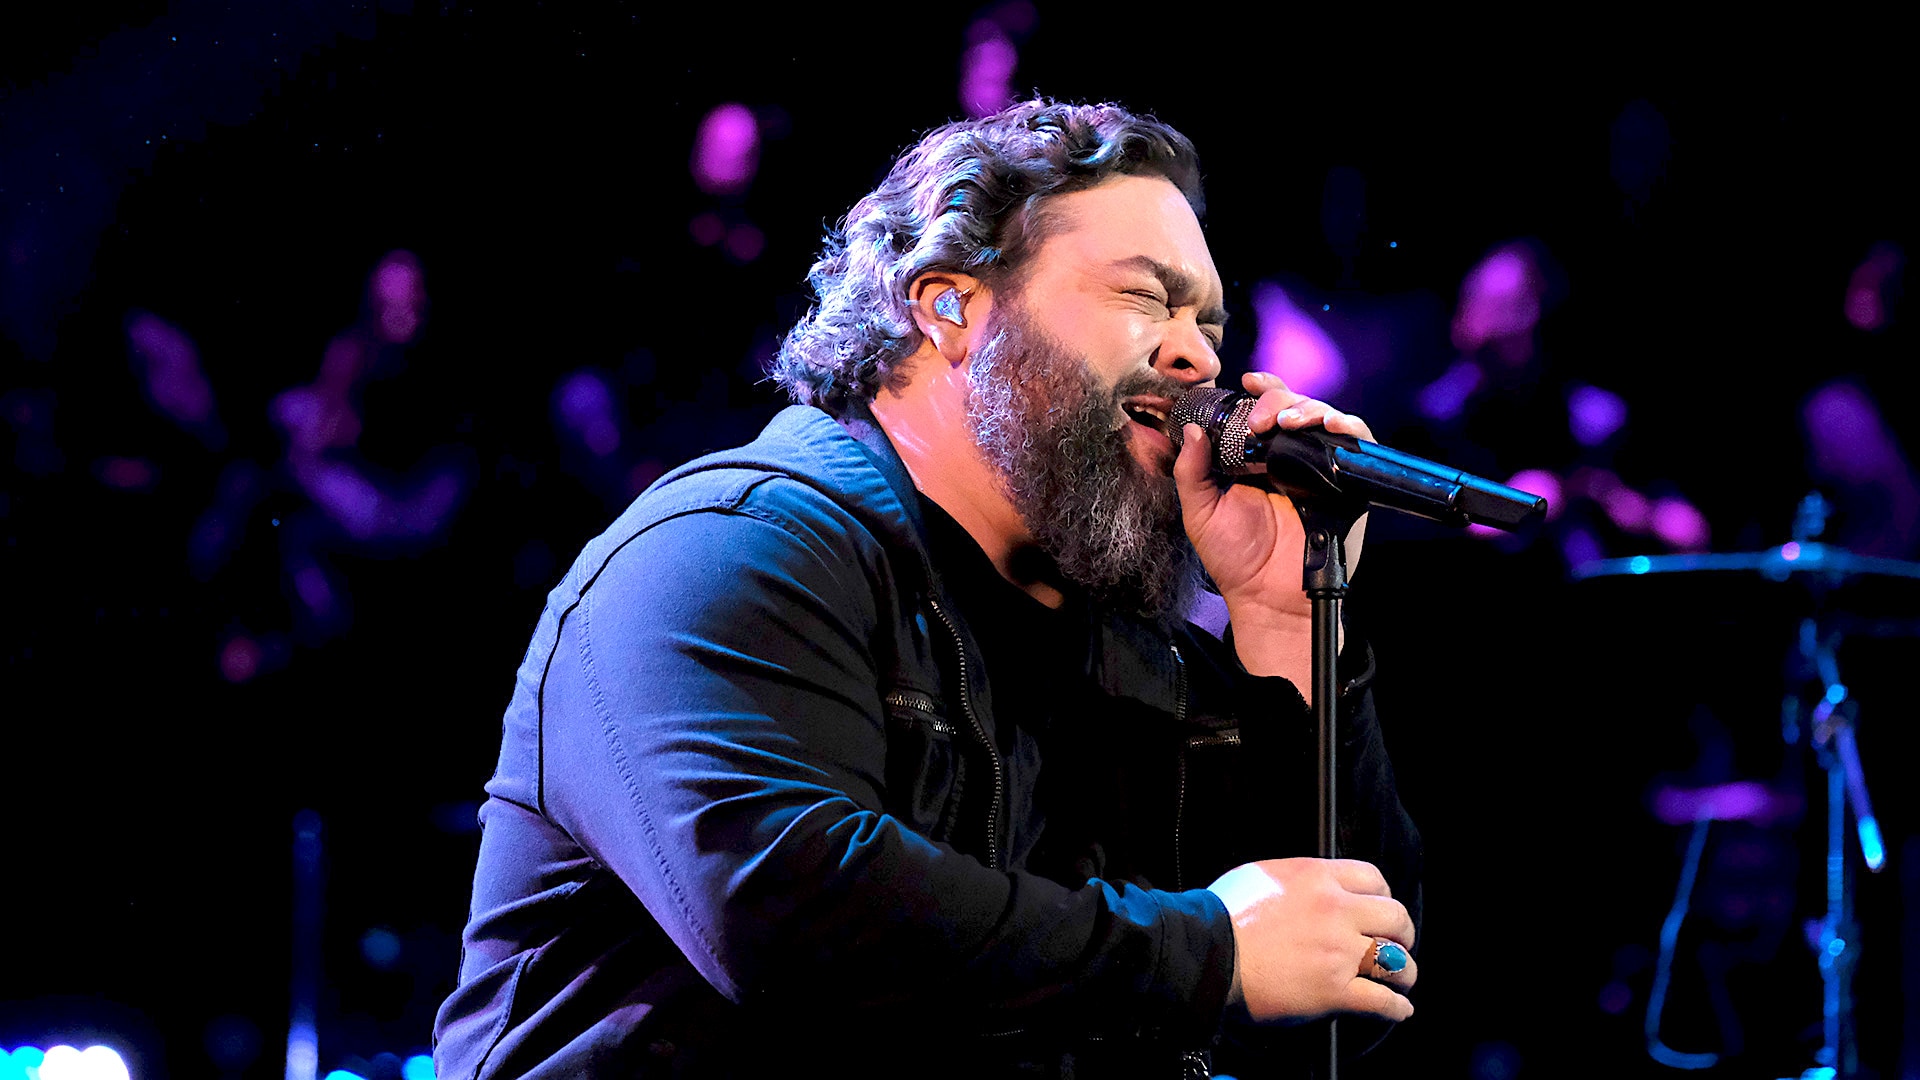 Watch The Voice Highlight Dave Fenley "Use Me"